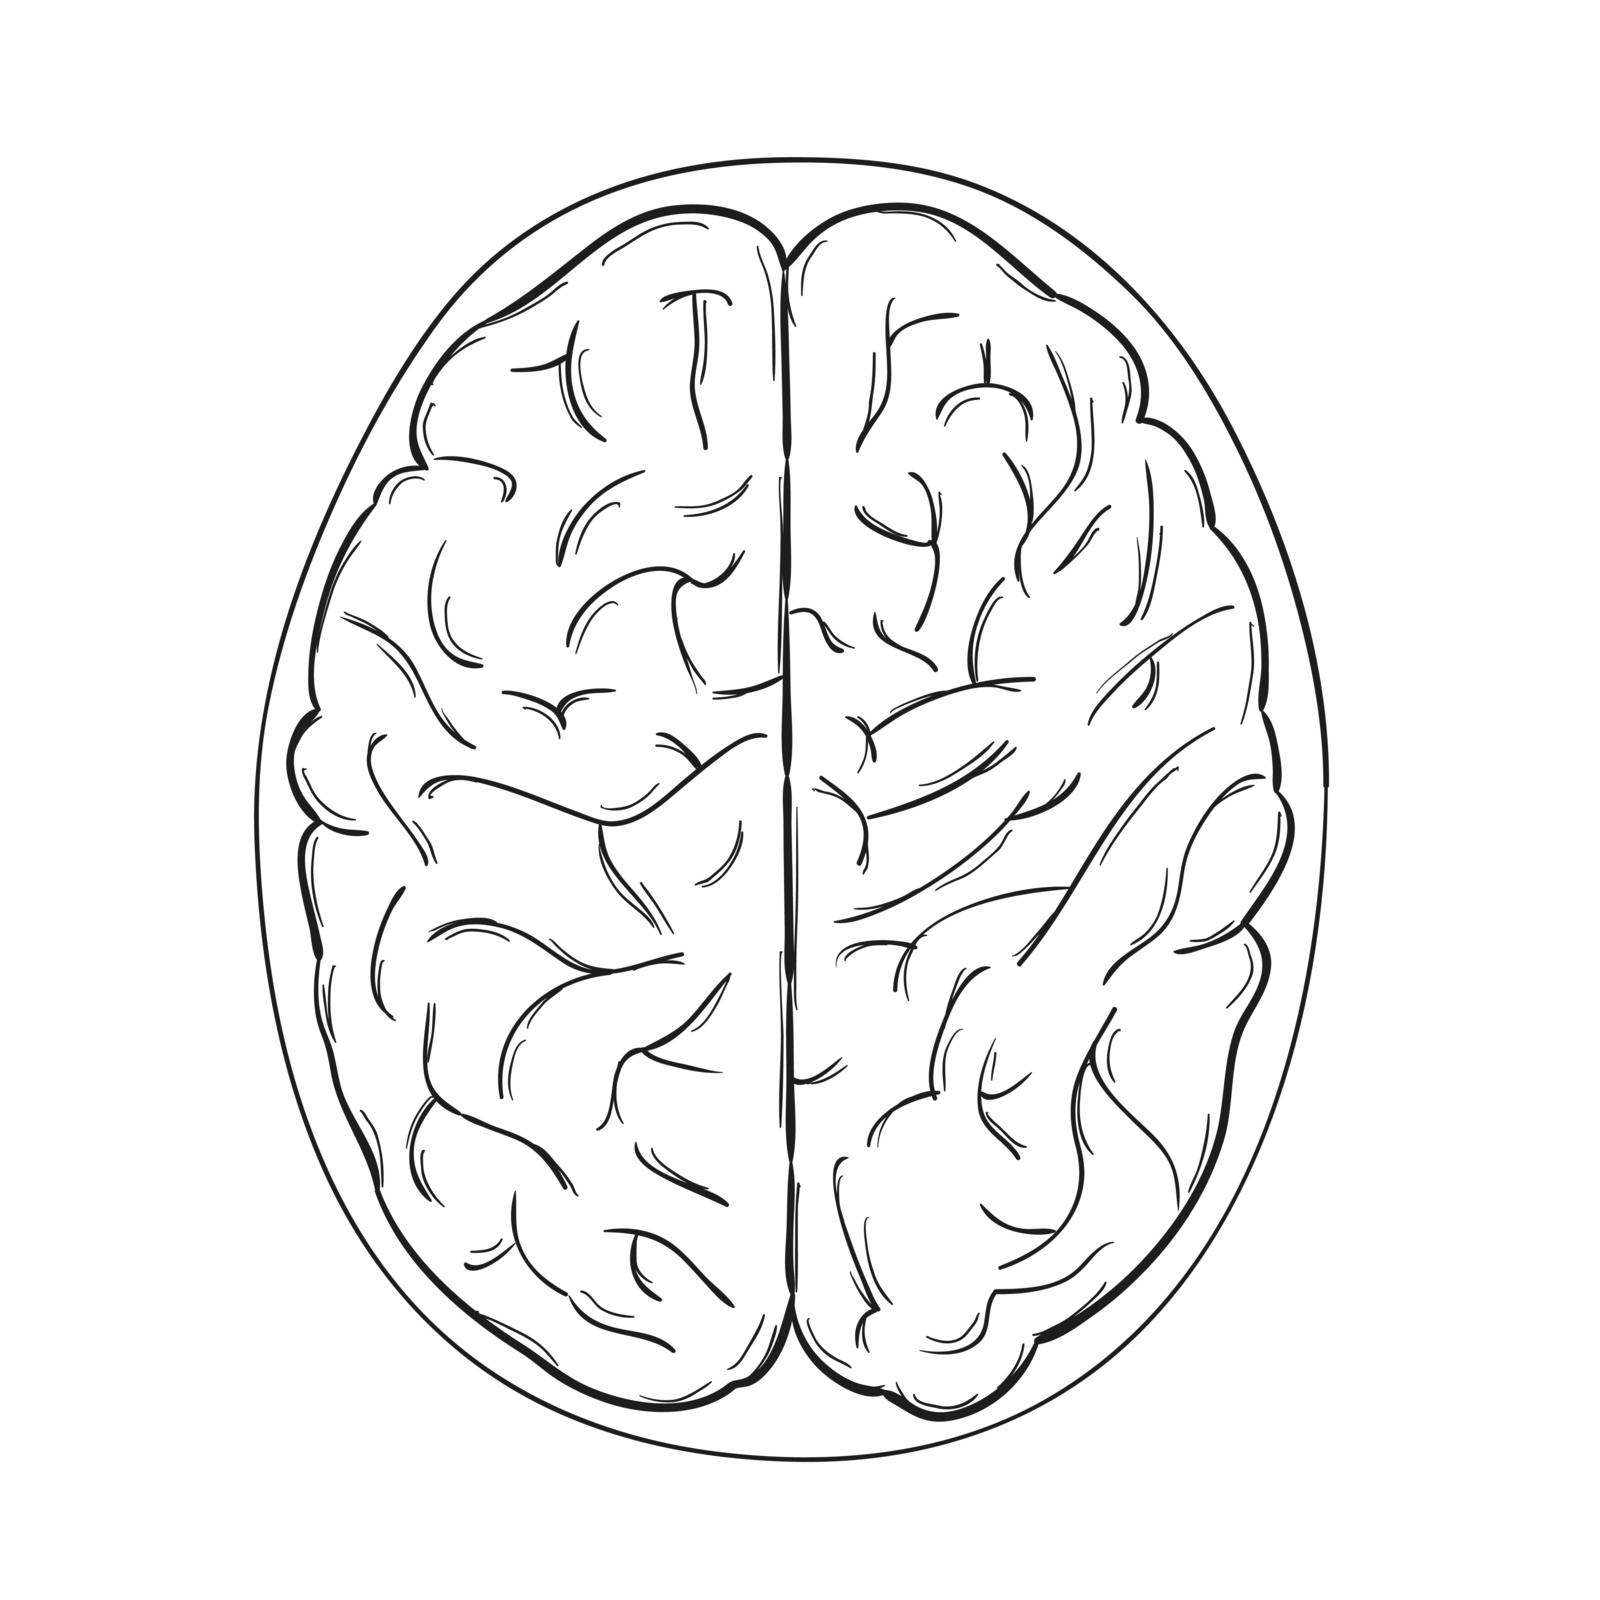 sketch of the human brain on white background, isolated